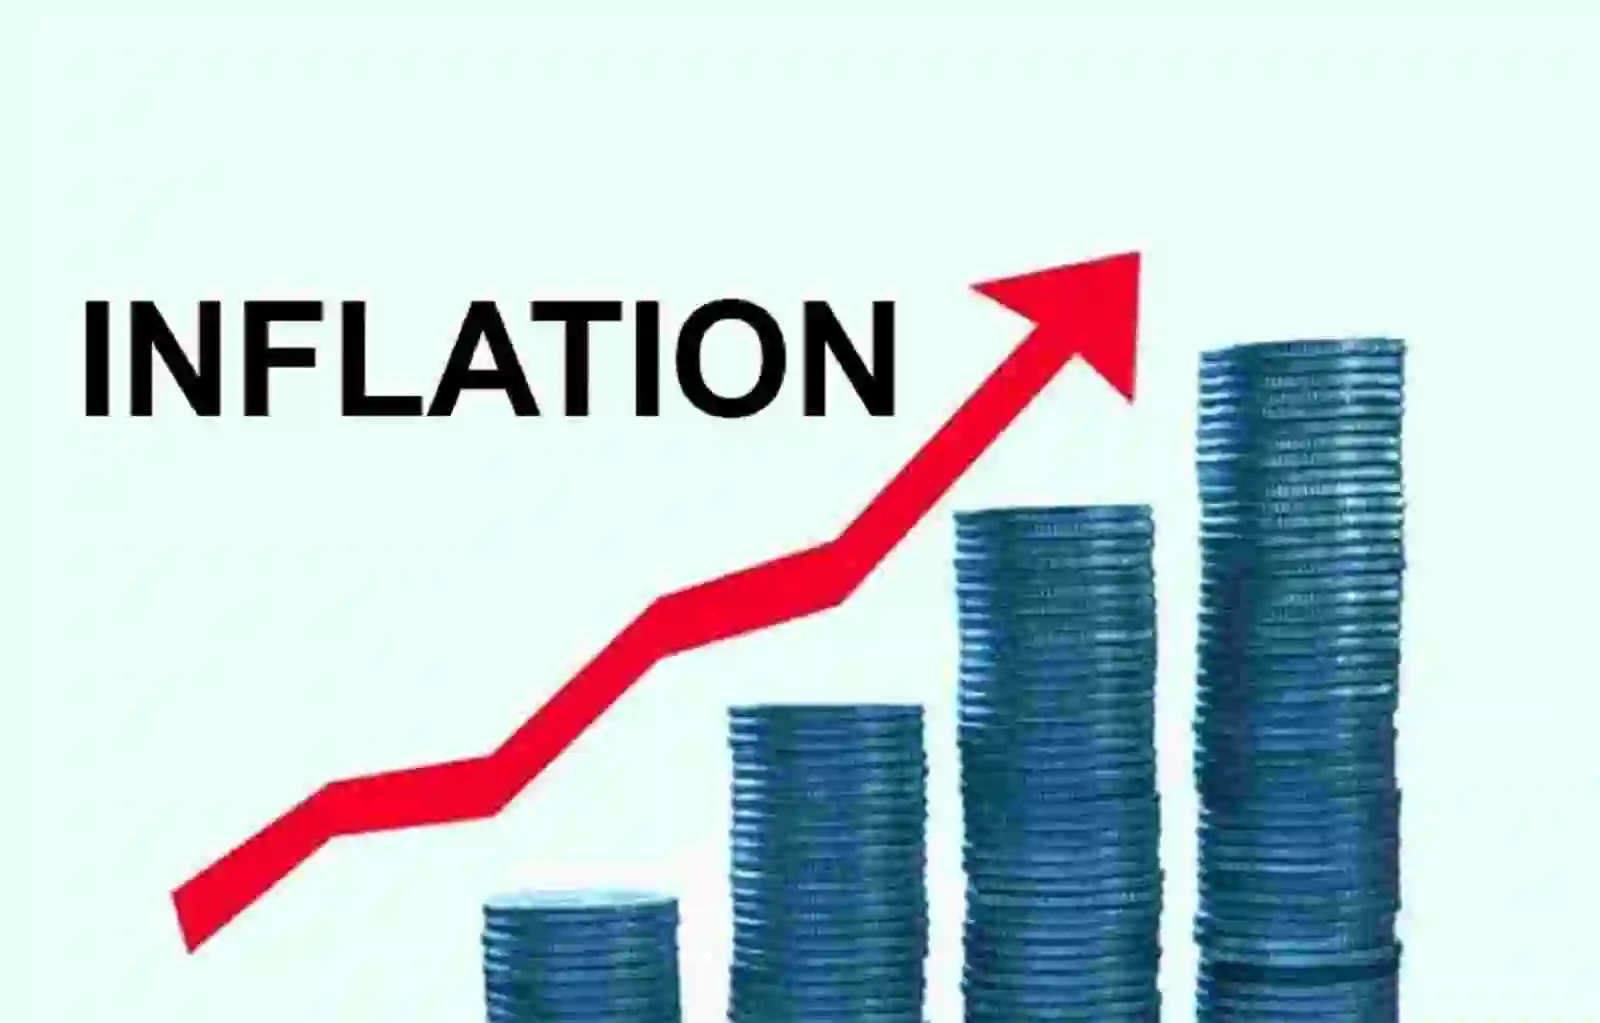 Nigeria’s inflation hits 14.23 percent as food prices increases